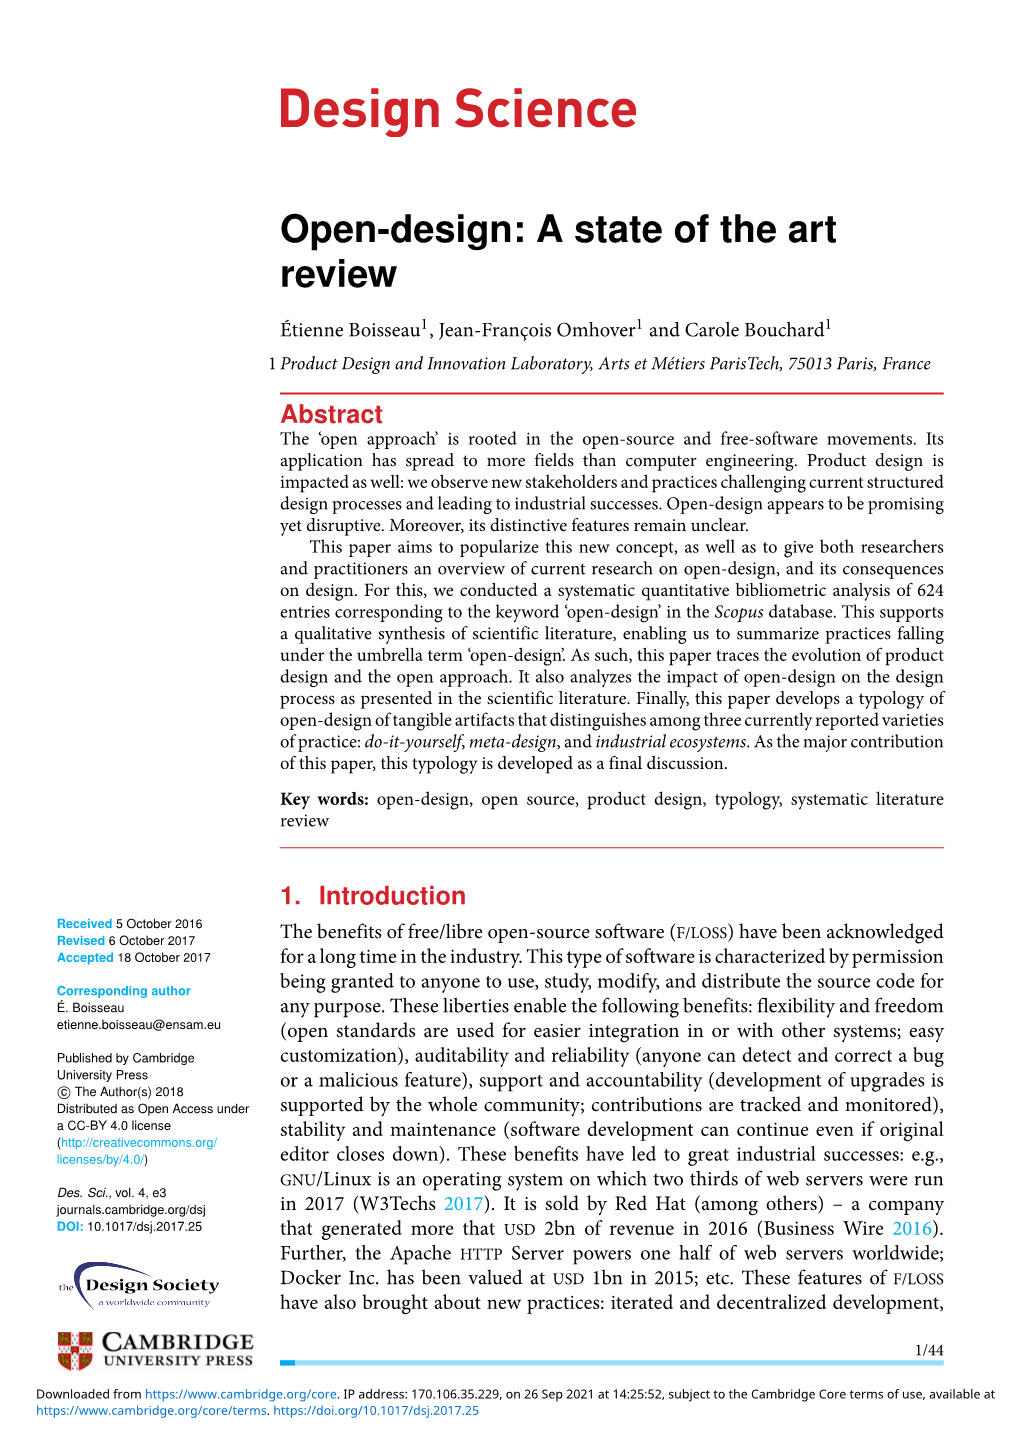 Open-Design: a State of the Art Review